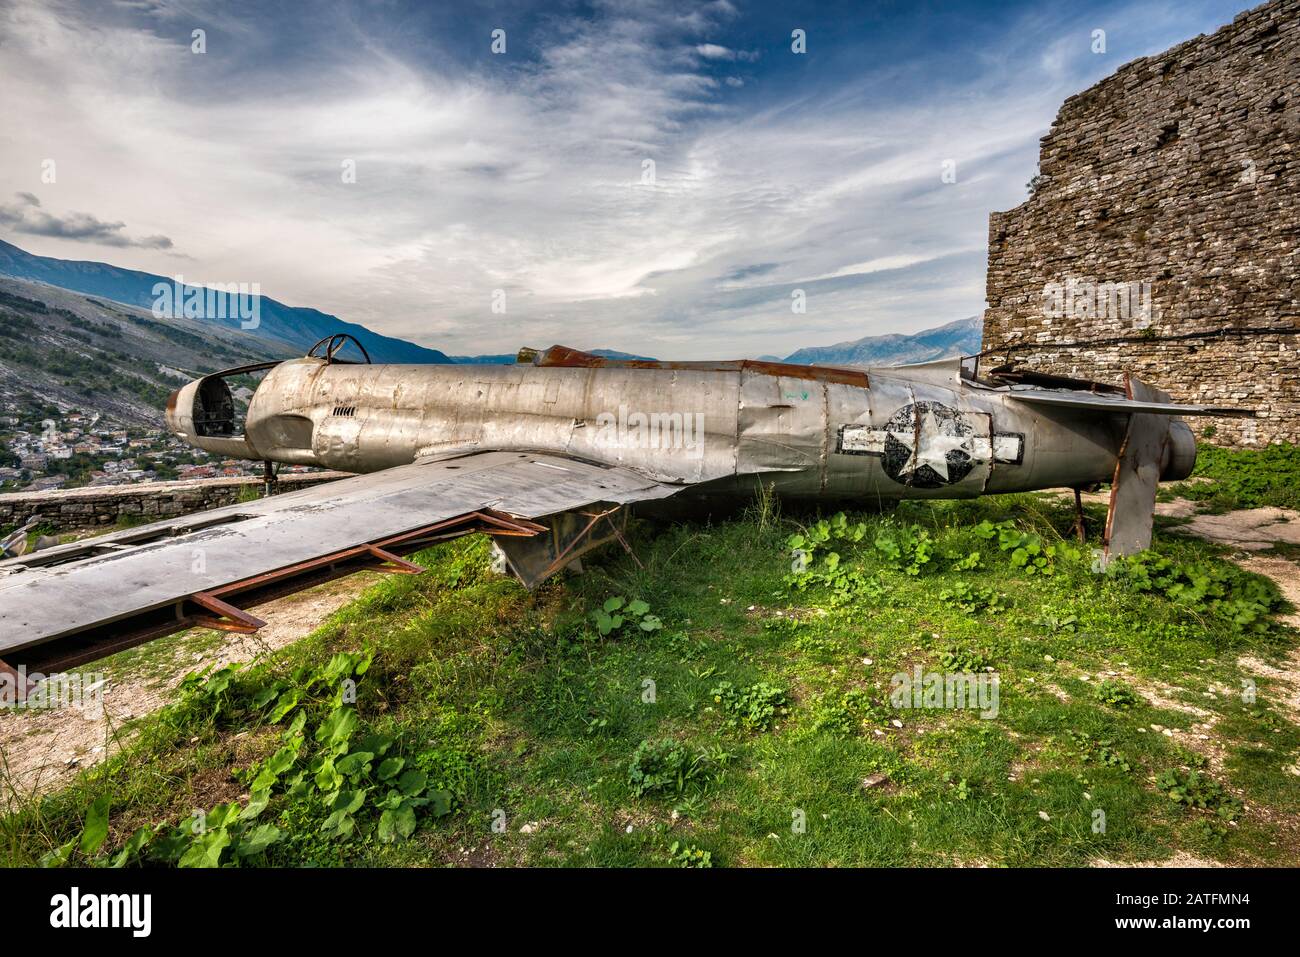 Remnants of Lockheed T-33A Shooting Star, US Air Force two-seat jet trainer, displayed at castle in Gjirokastra (Gjirokaster), Albania Stock Photo